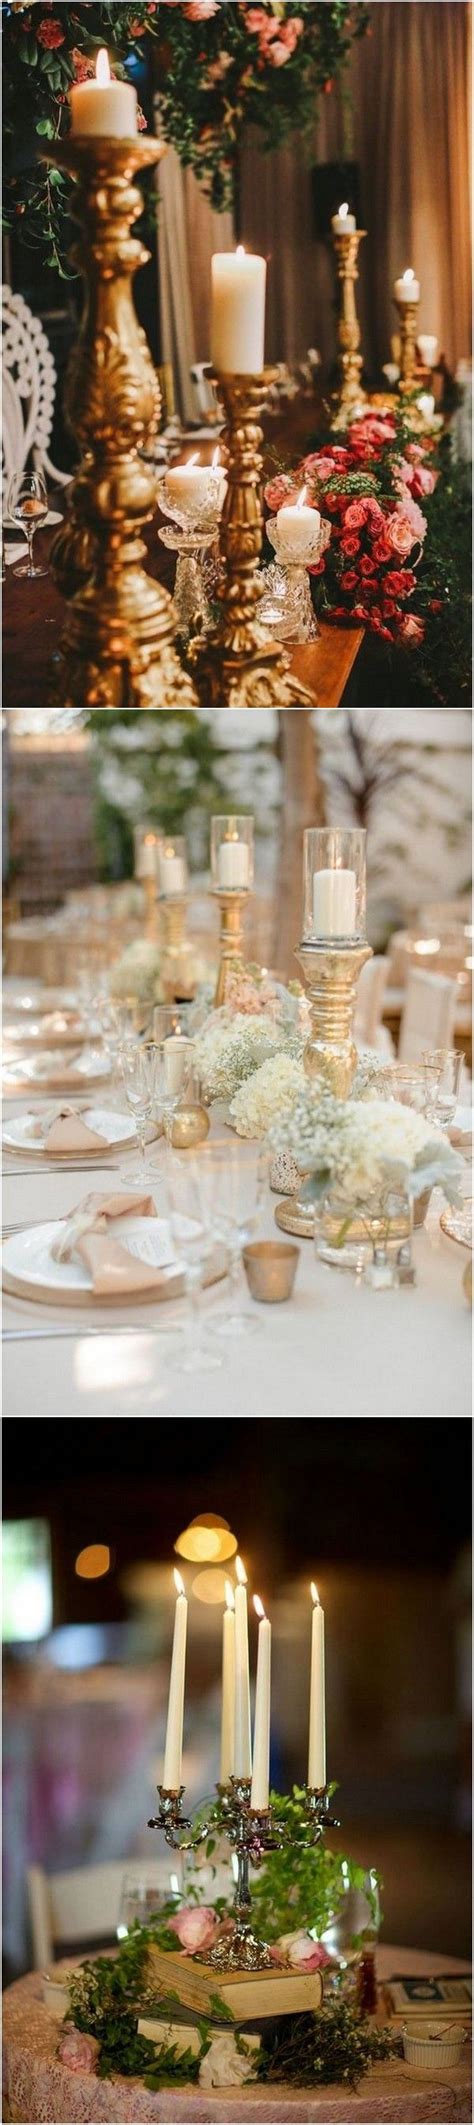 Top 20 Vintage Wedding Centerpieces With Candlesticks Emma Loves